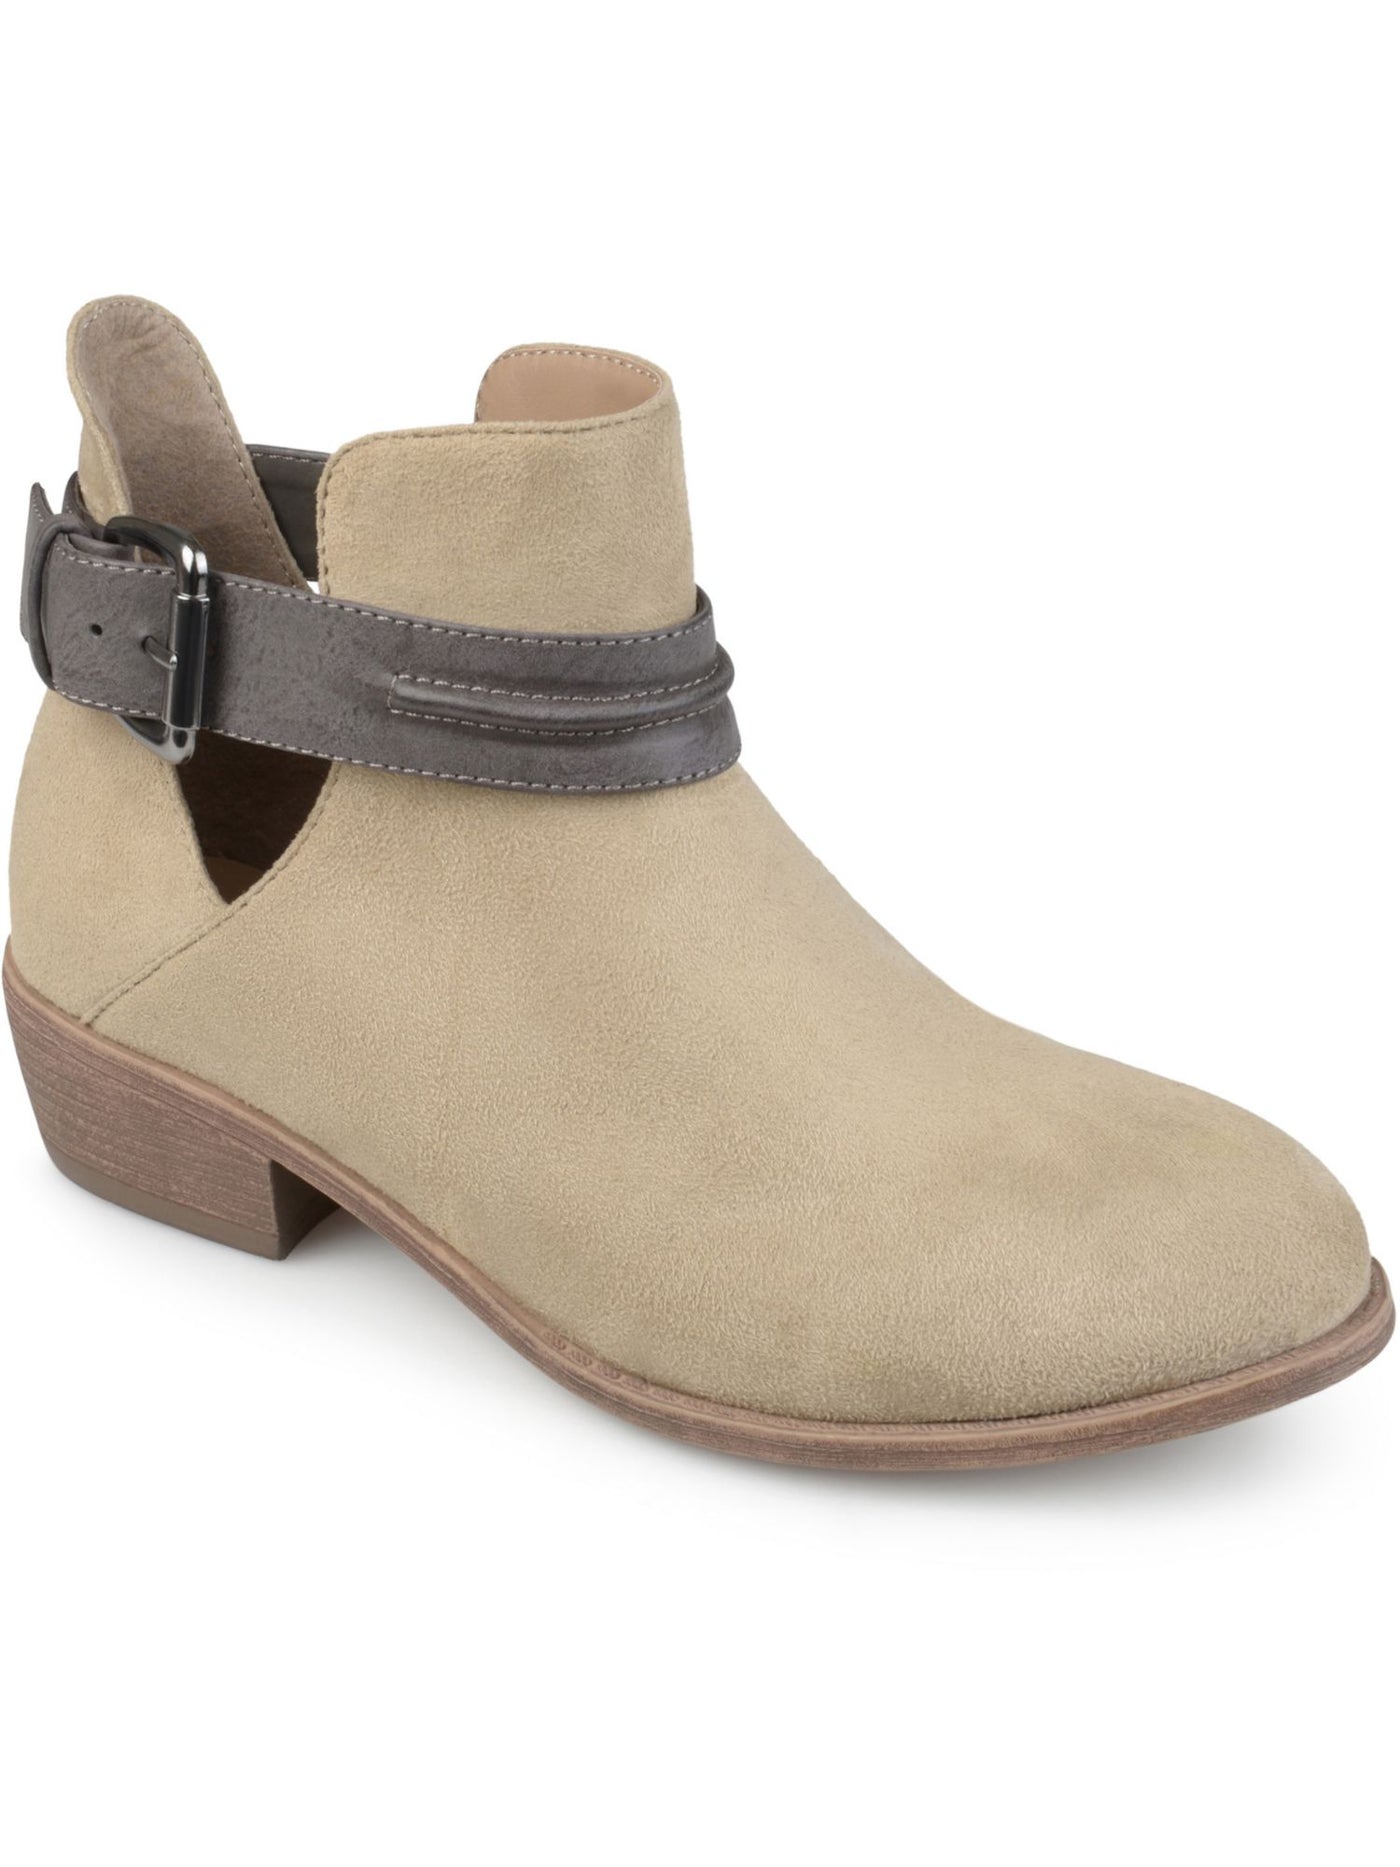 JOURNEE COLLECTION Womens Beige Ankle Strap Cushioned Buckle Accent Mavrik Round Toe Block Heel Booties 8.5